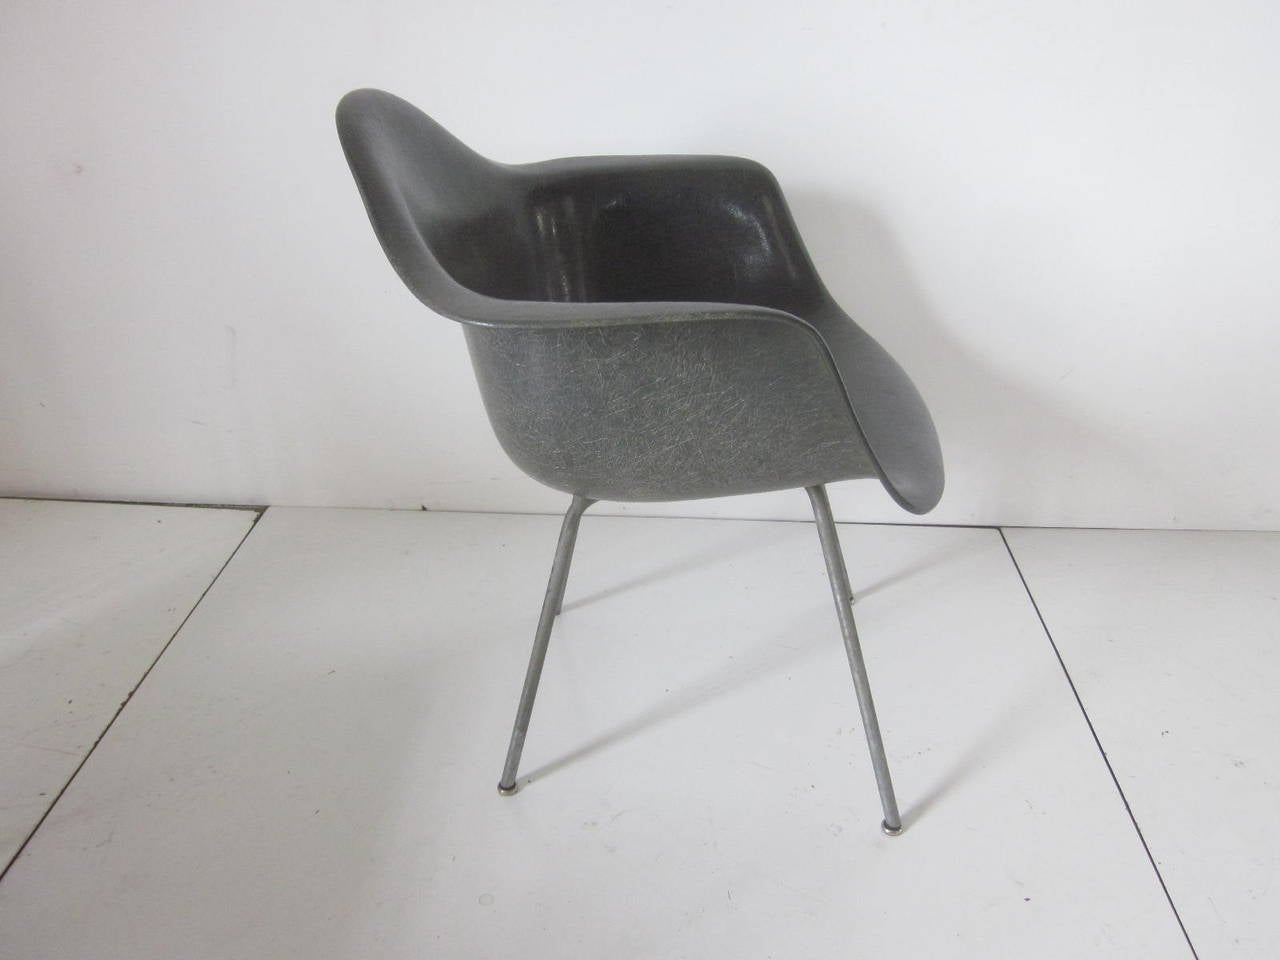 A very early Eames fiberglass arm shell chair in elephant gray, rope edge, zinc X-base legs and large early rubber shock mounts. Retains the manufactures decal to the front bottom Zenith company Herman Miller, Charles Eames design.